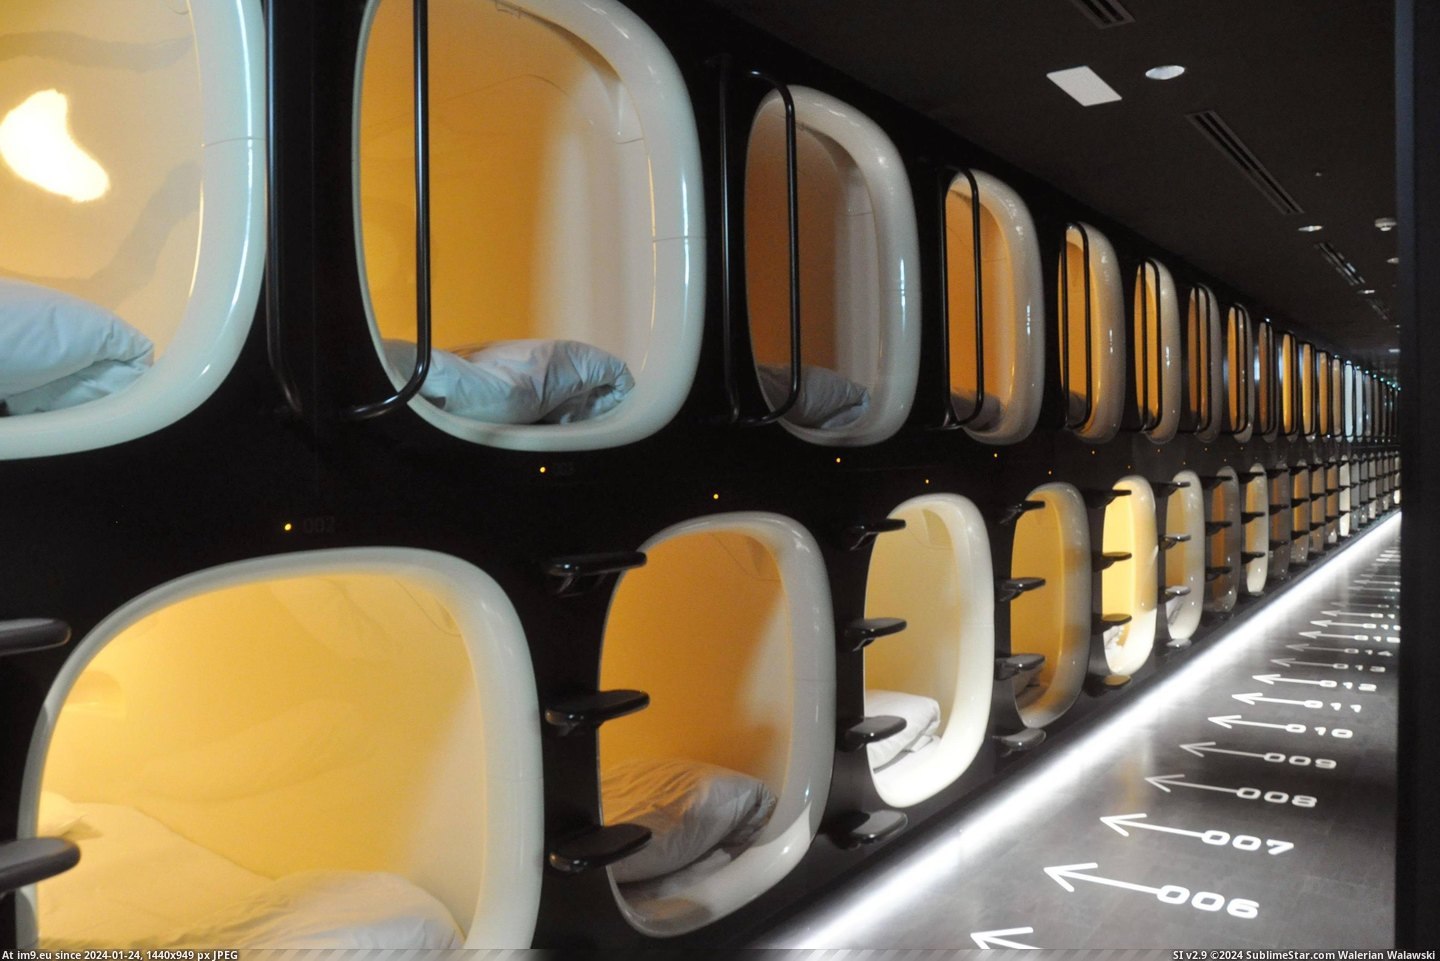 #Japanese #Photos #Capsule #Kyoto #Hotel #Hours [Pics] Photos of Japanese 'capsule' hotel - Nine Hours (Kyoto and Narita airports) 3 Pic. (Image of album My r/PICS favs))